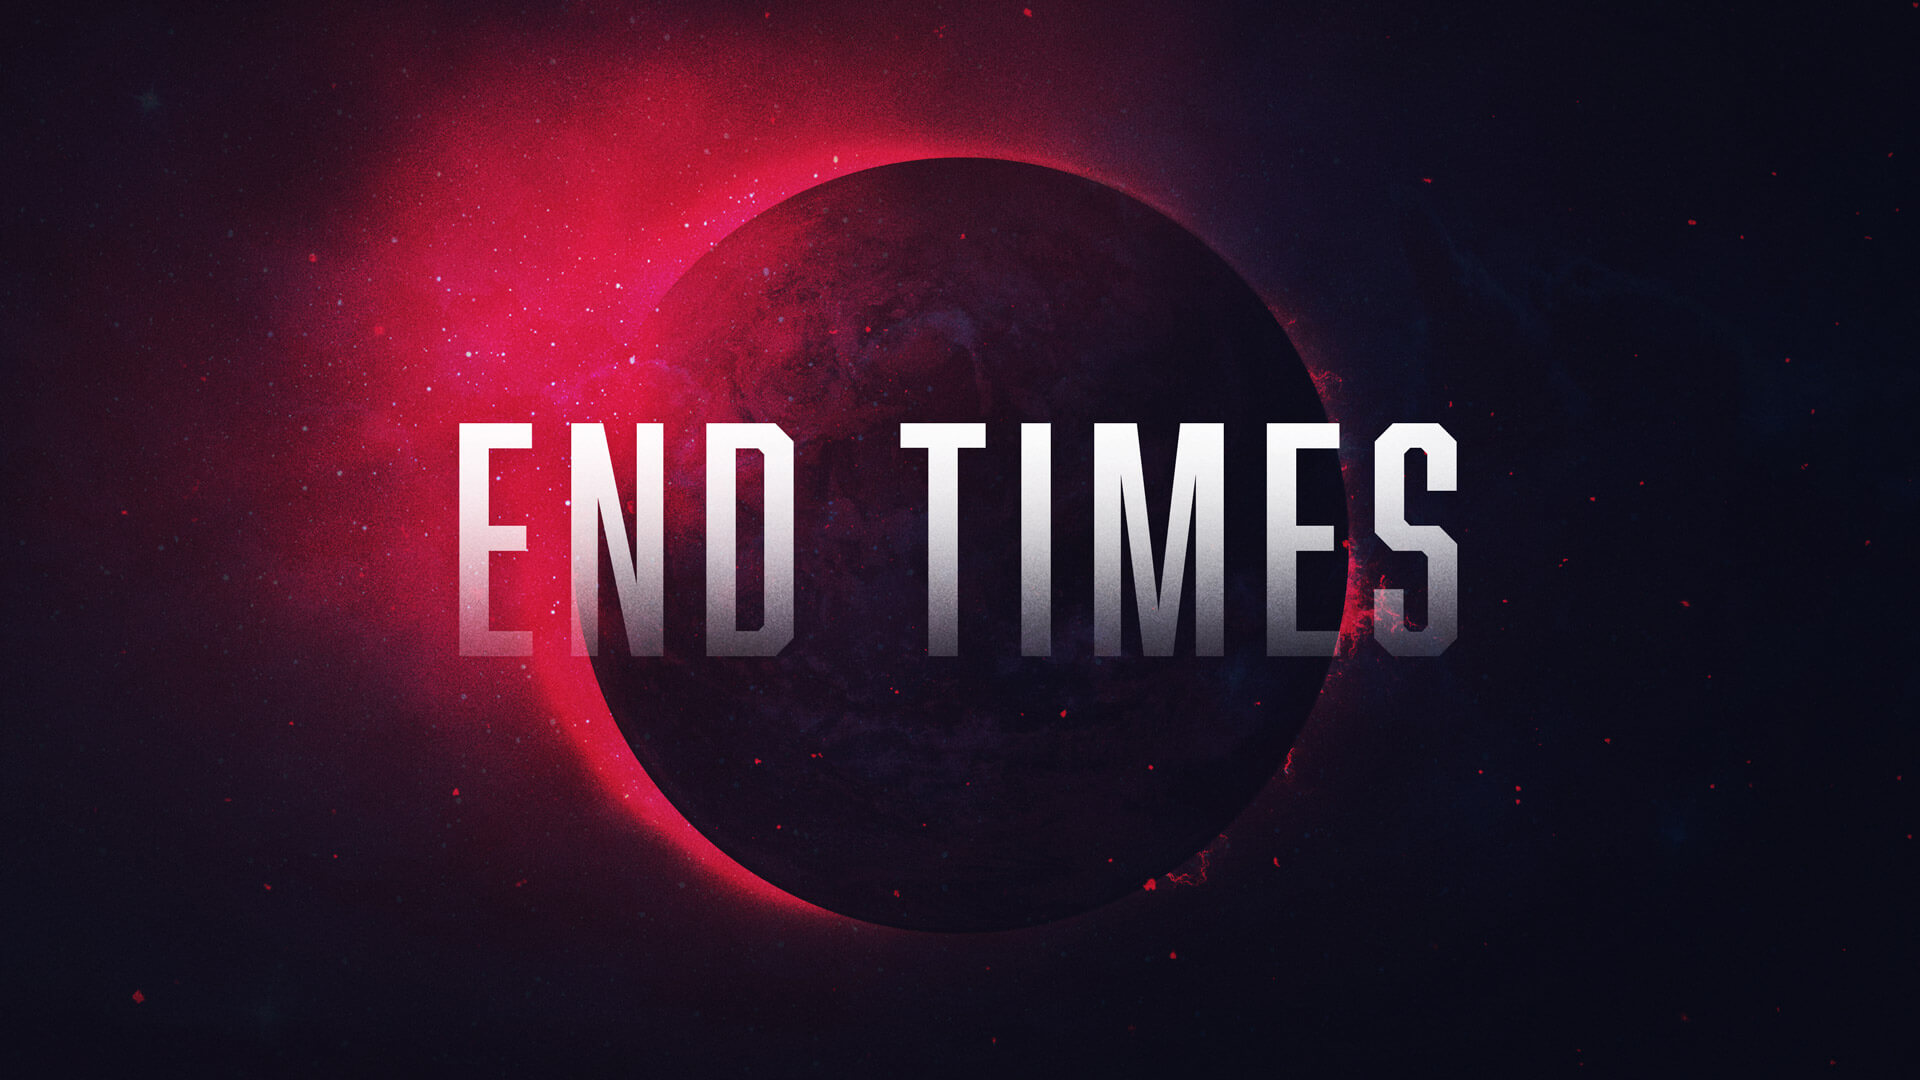 Timeline of the End Times